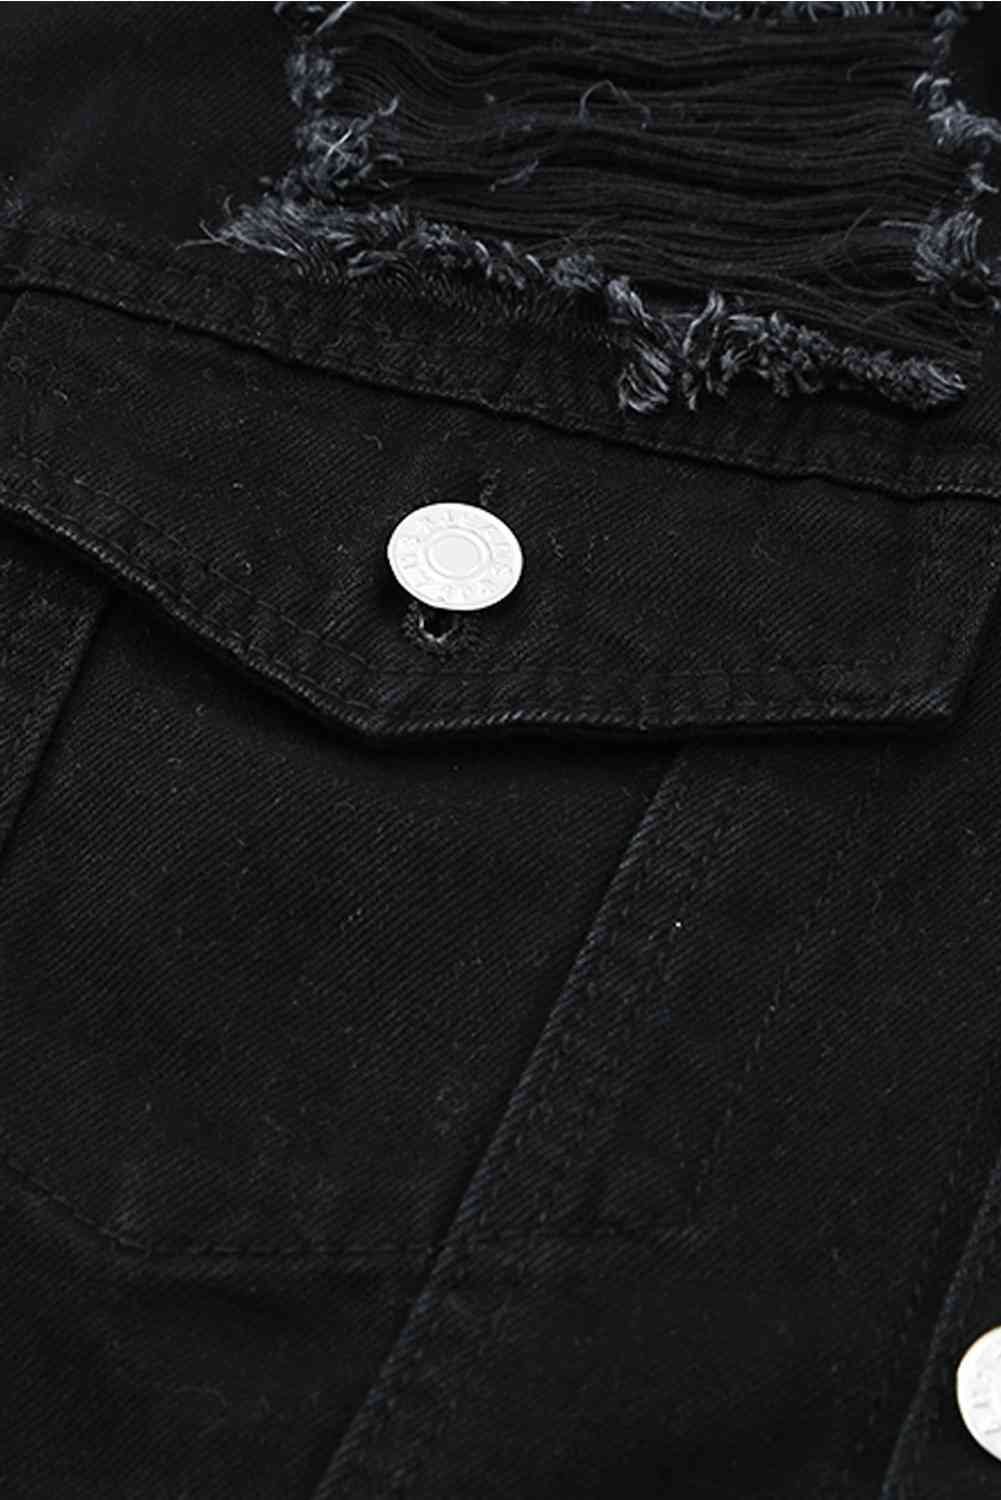 Distressed Button-Up Denim Jacket with Pockets